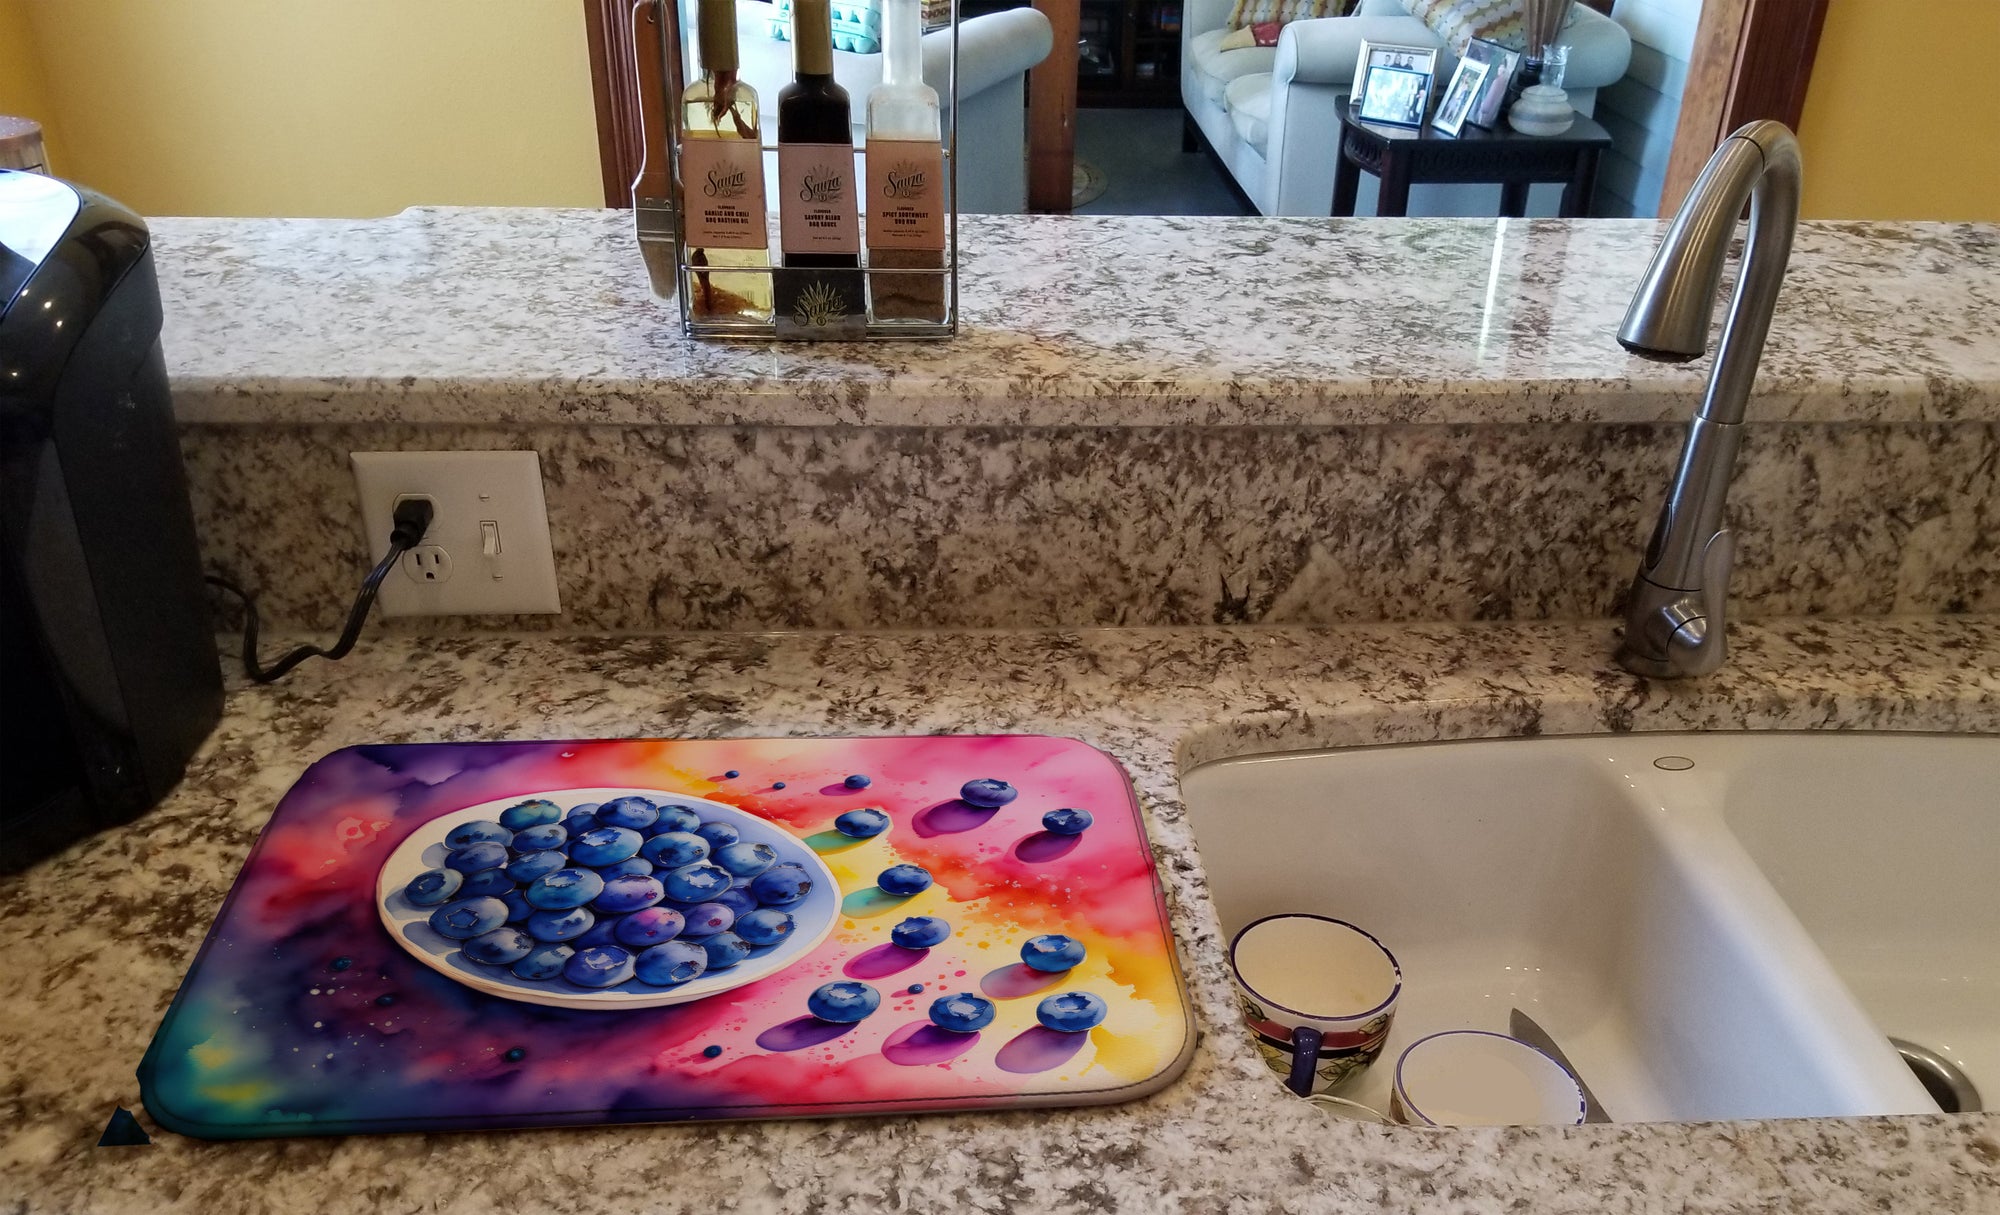 Buy this Colorful Blueberries Dish Drying Mat